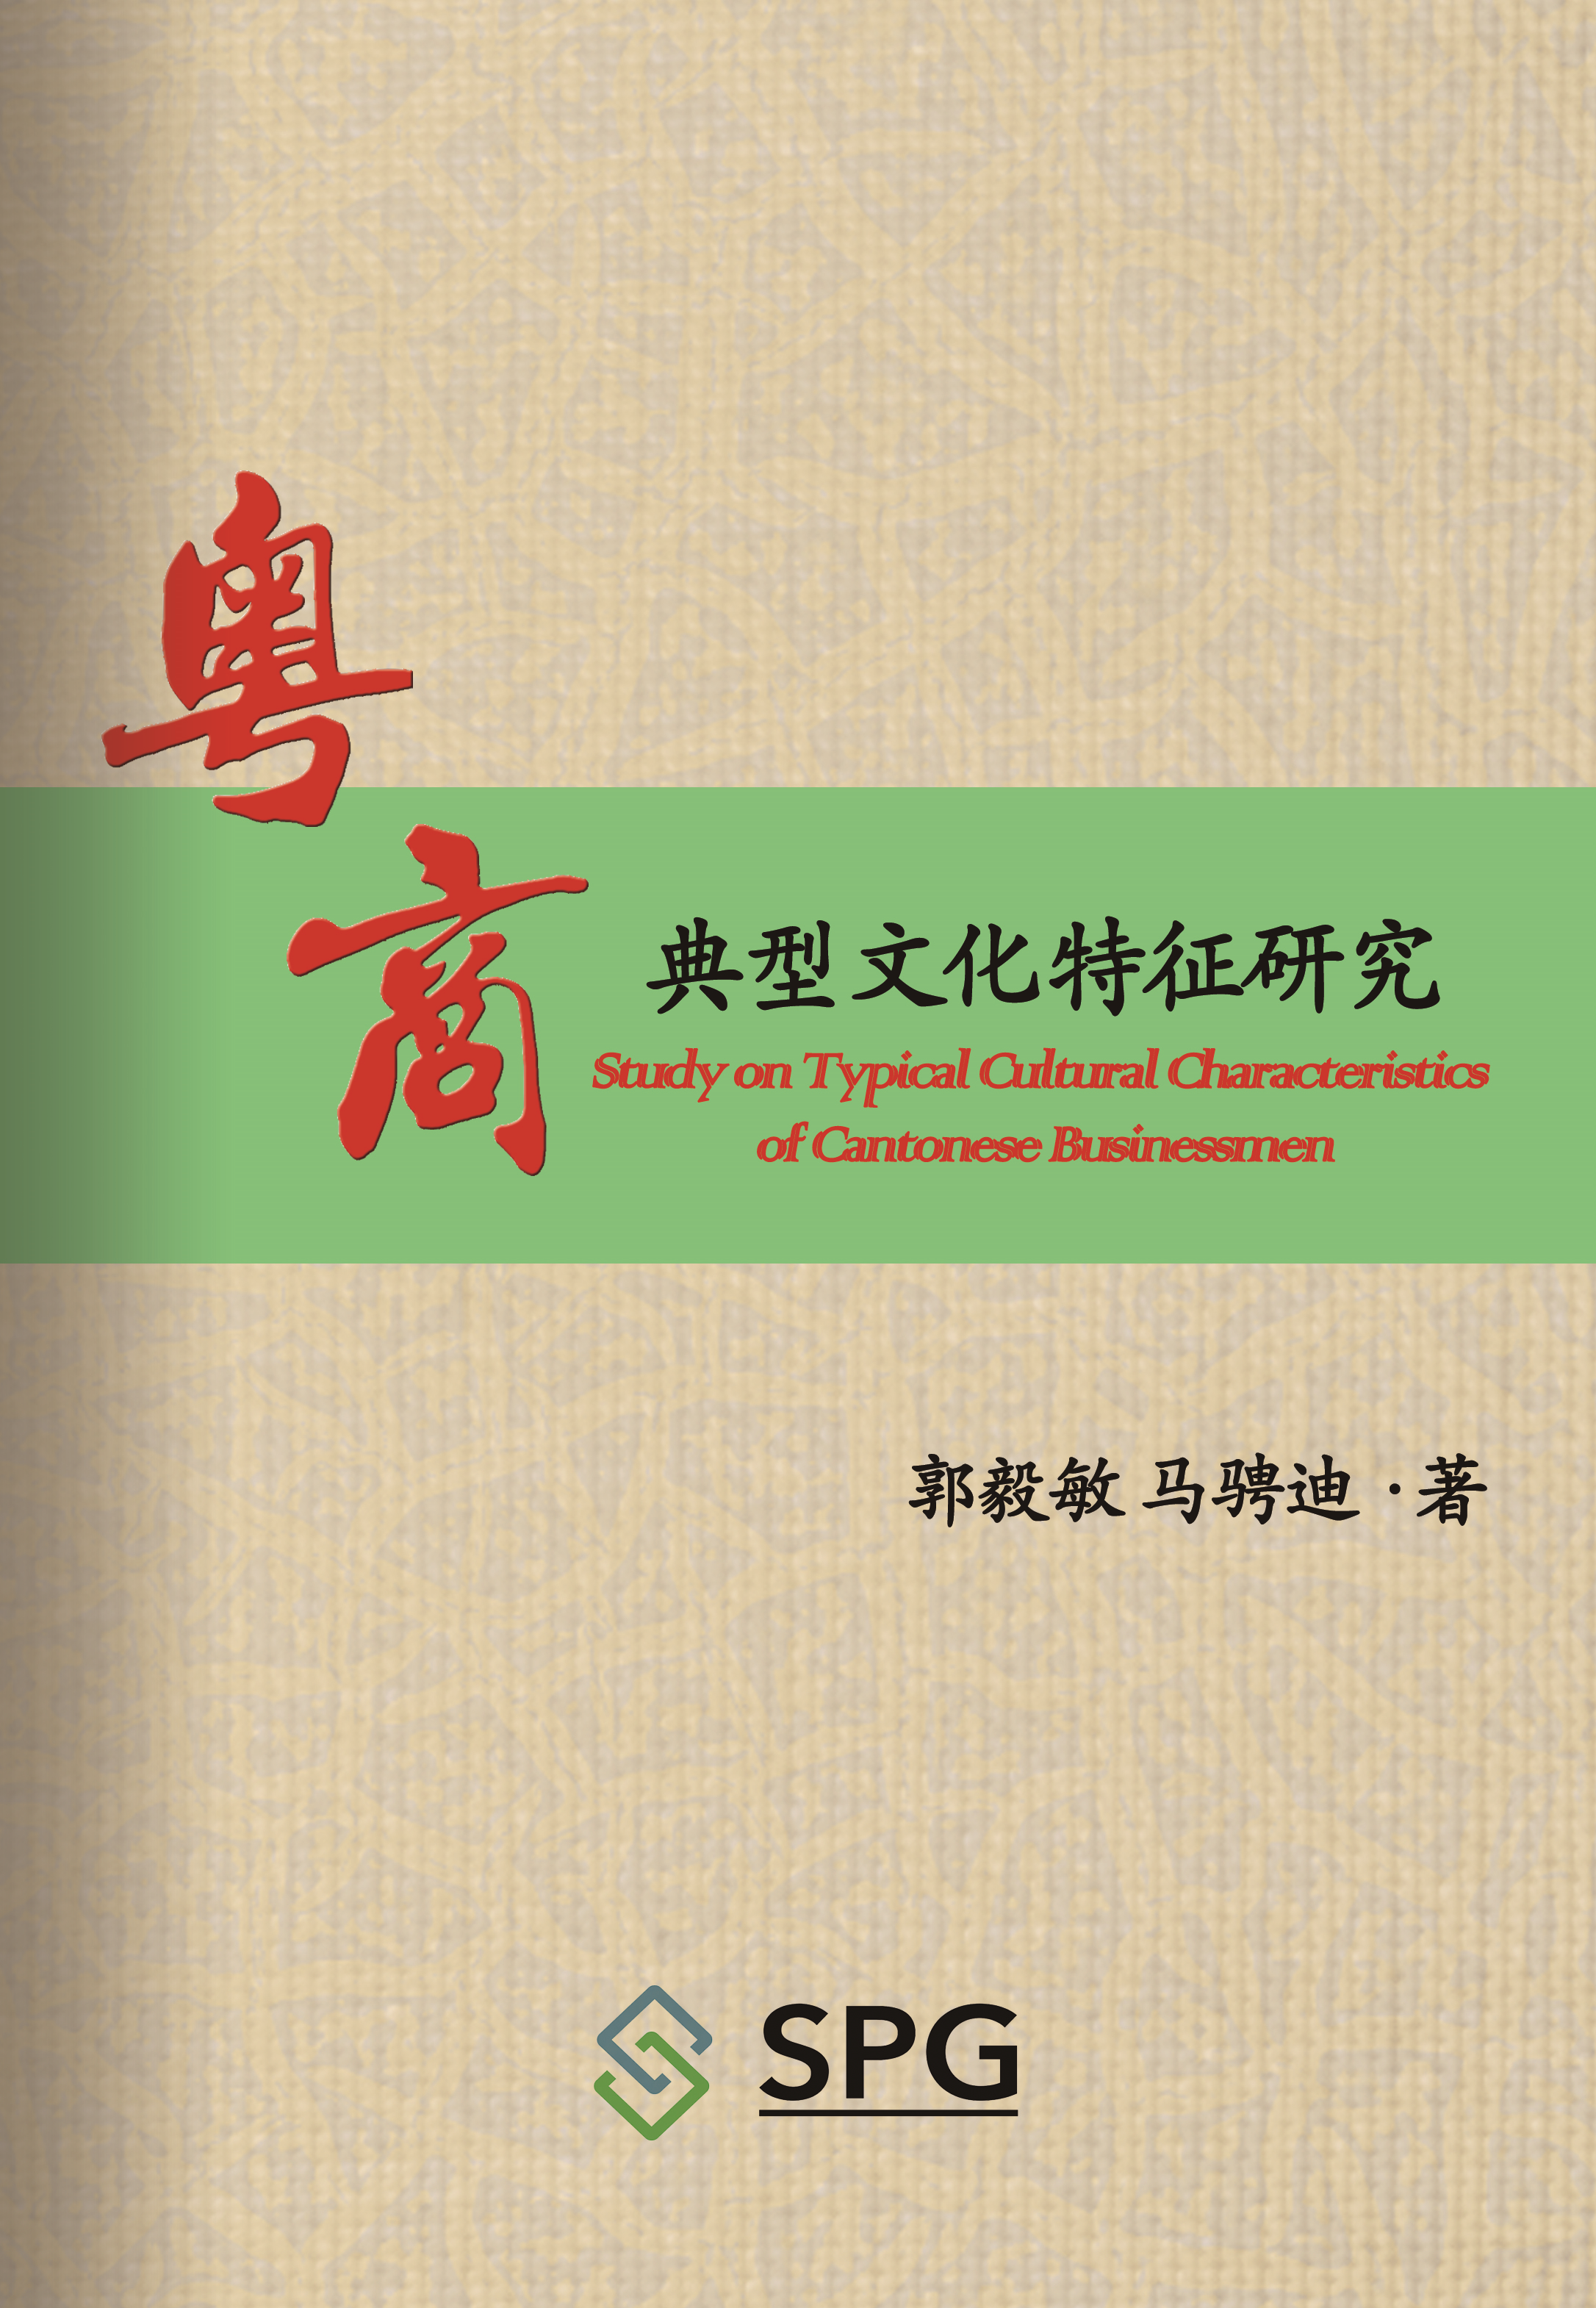 Study on Typical Cultural Characteristics of Cantonese Businessmen | Scholar Publishing Group